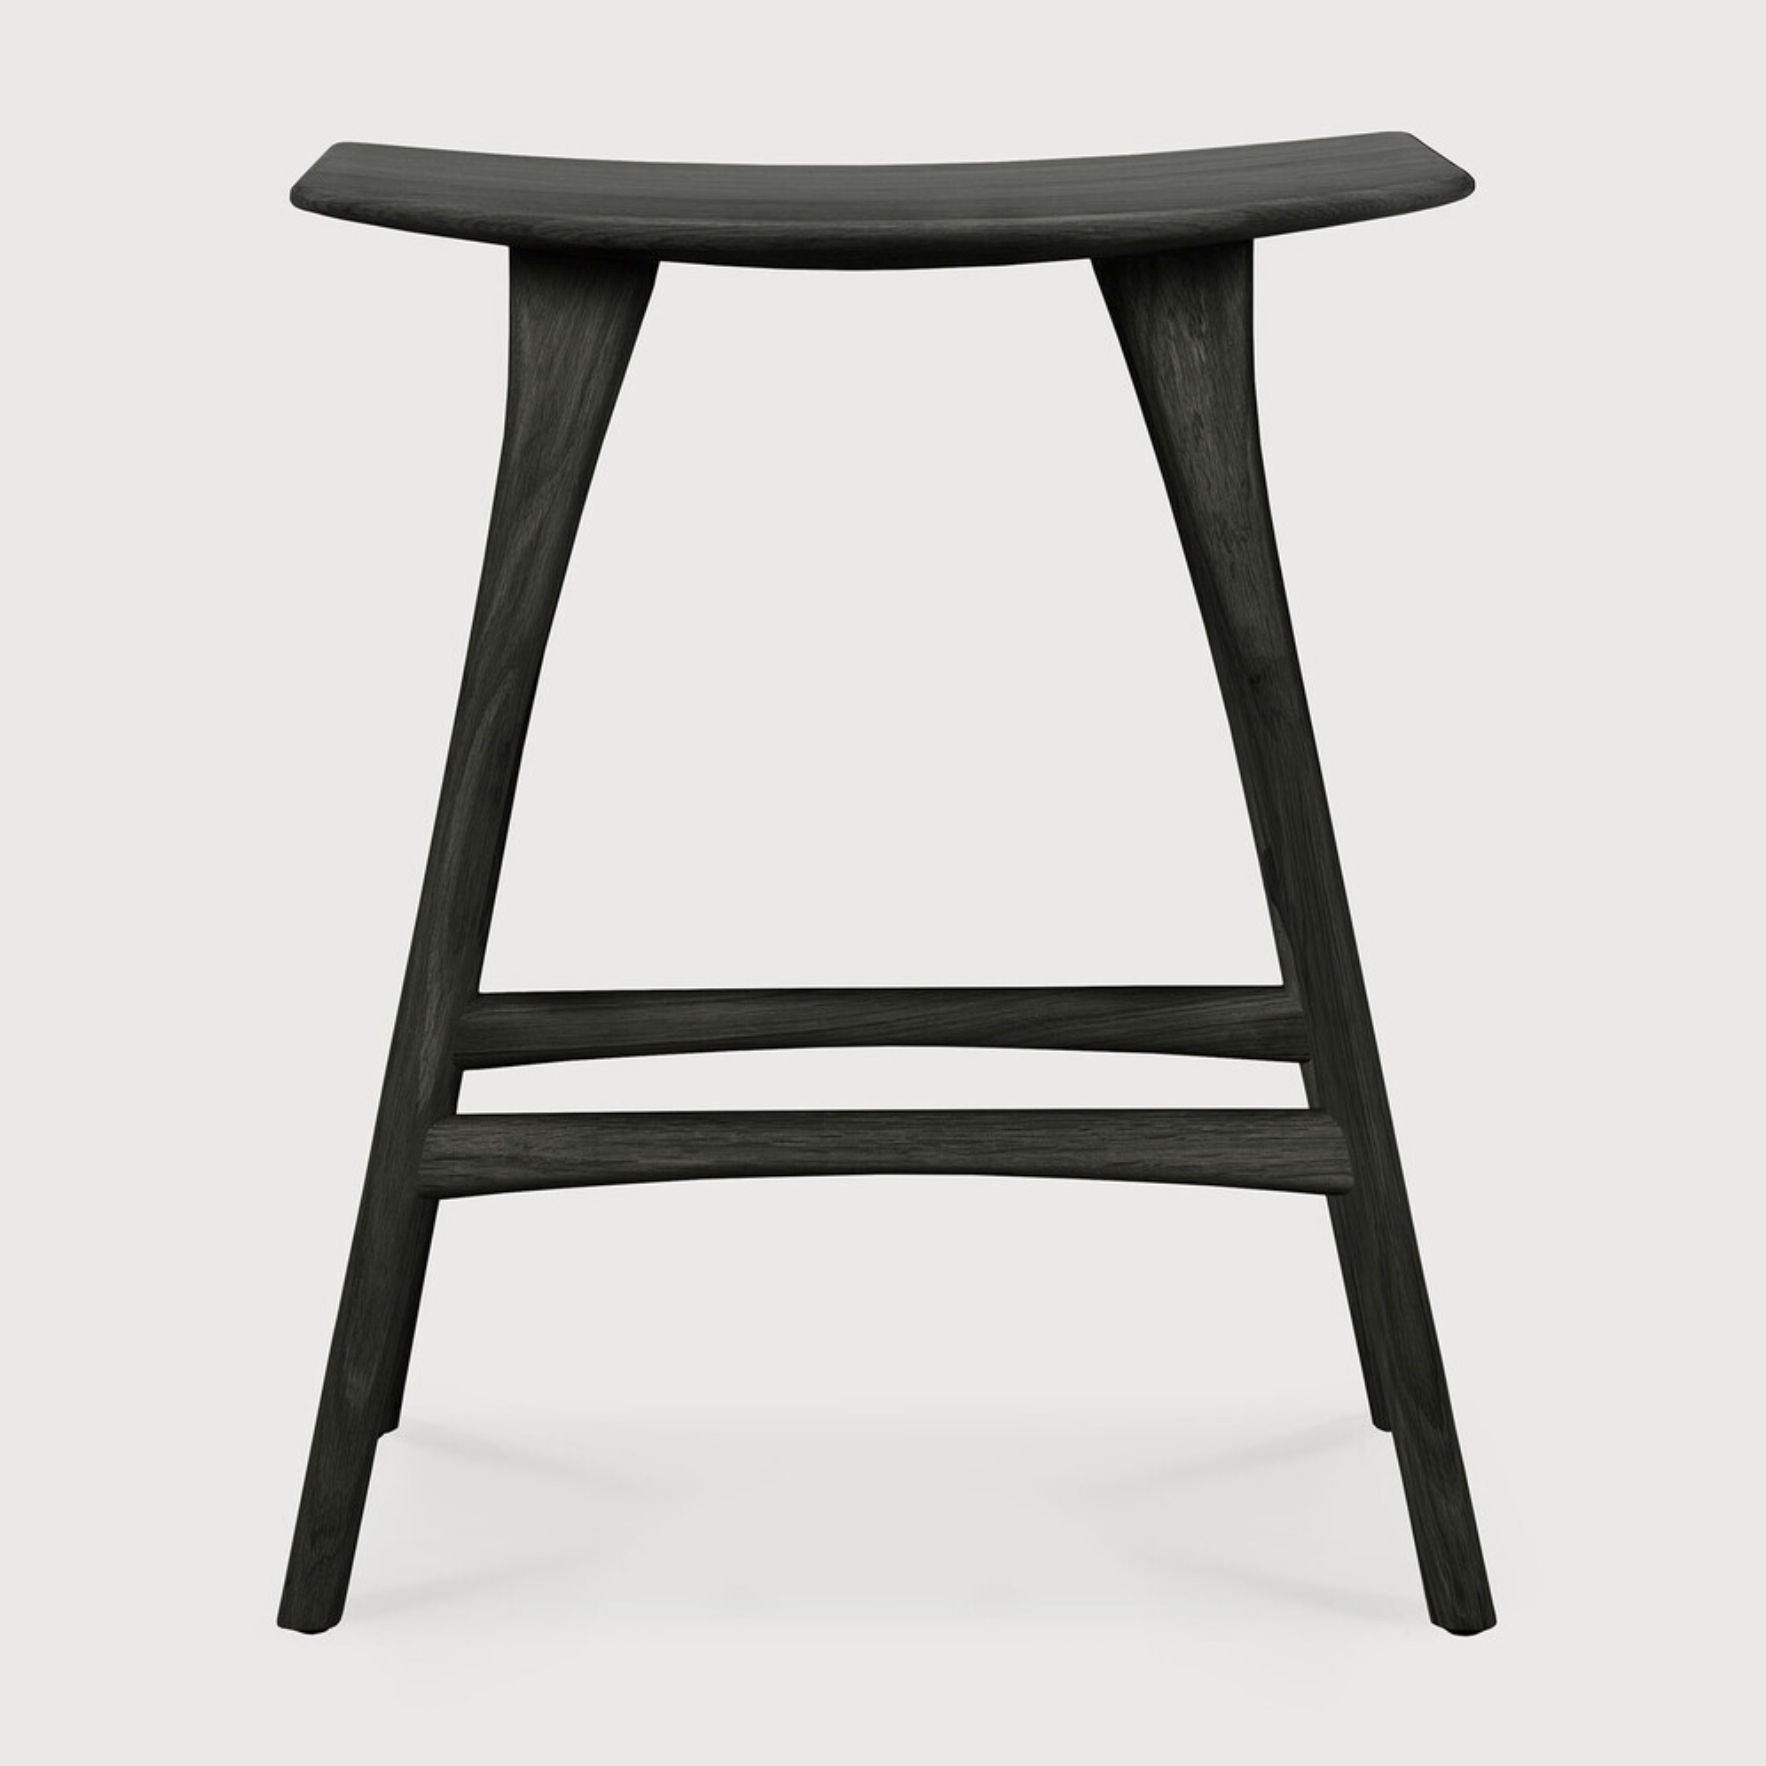 We love the versatility of this Oak Osso Bar + Counter Stool - Black.  A sleek piece to add in your bar area, kitchen island, or a standing desk stool.   Bar Dimensions: 22.5"w x 13"d x 31.5"h Seat Height: 30.5"  Counter Dimensions: 22.5"w x 14.5"d x 24.5"h Seat Height: 23"  Material: Oak, 100% Solid Wood Finish: Varnished